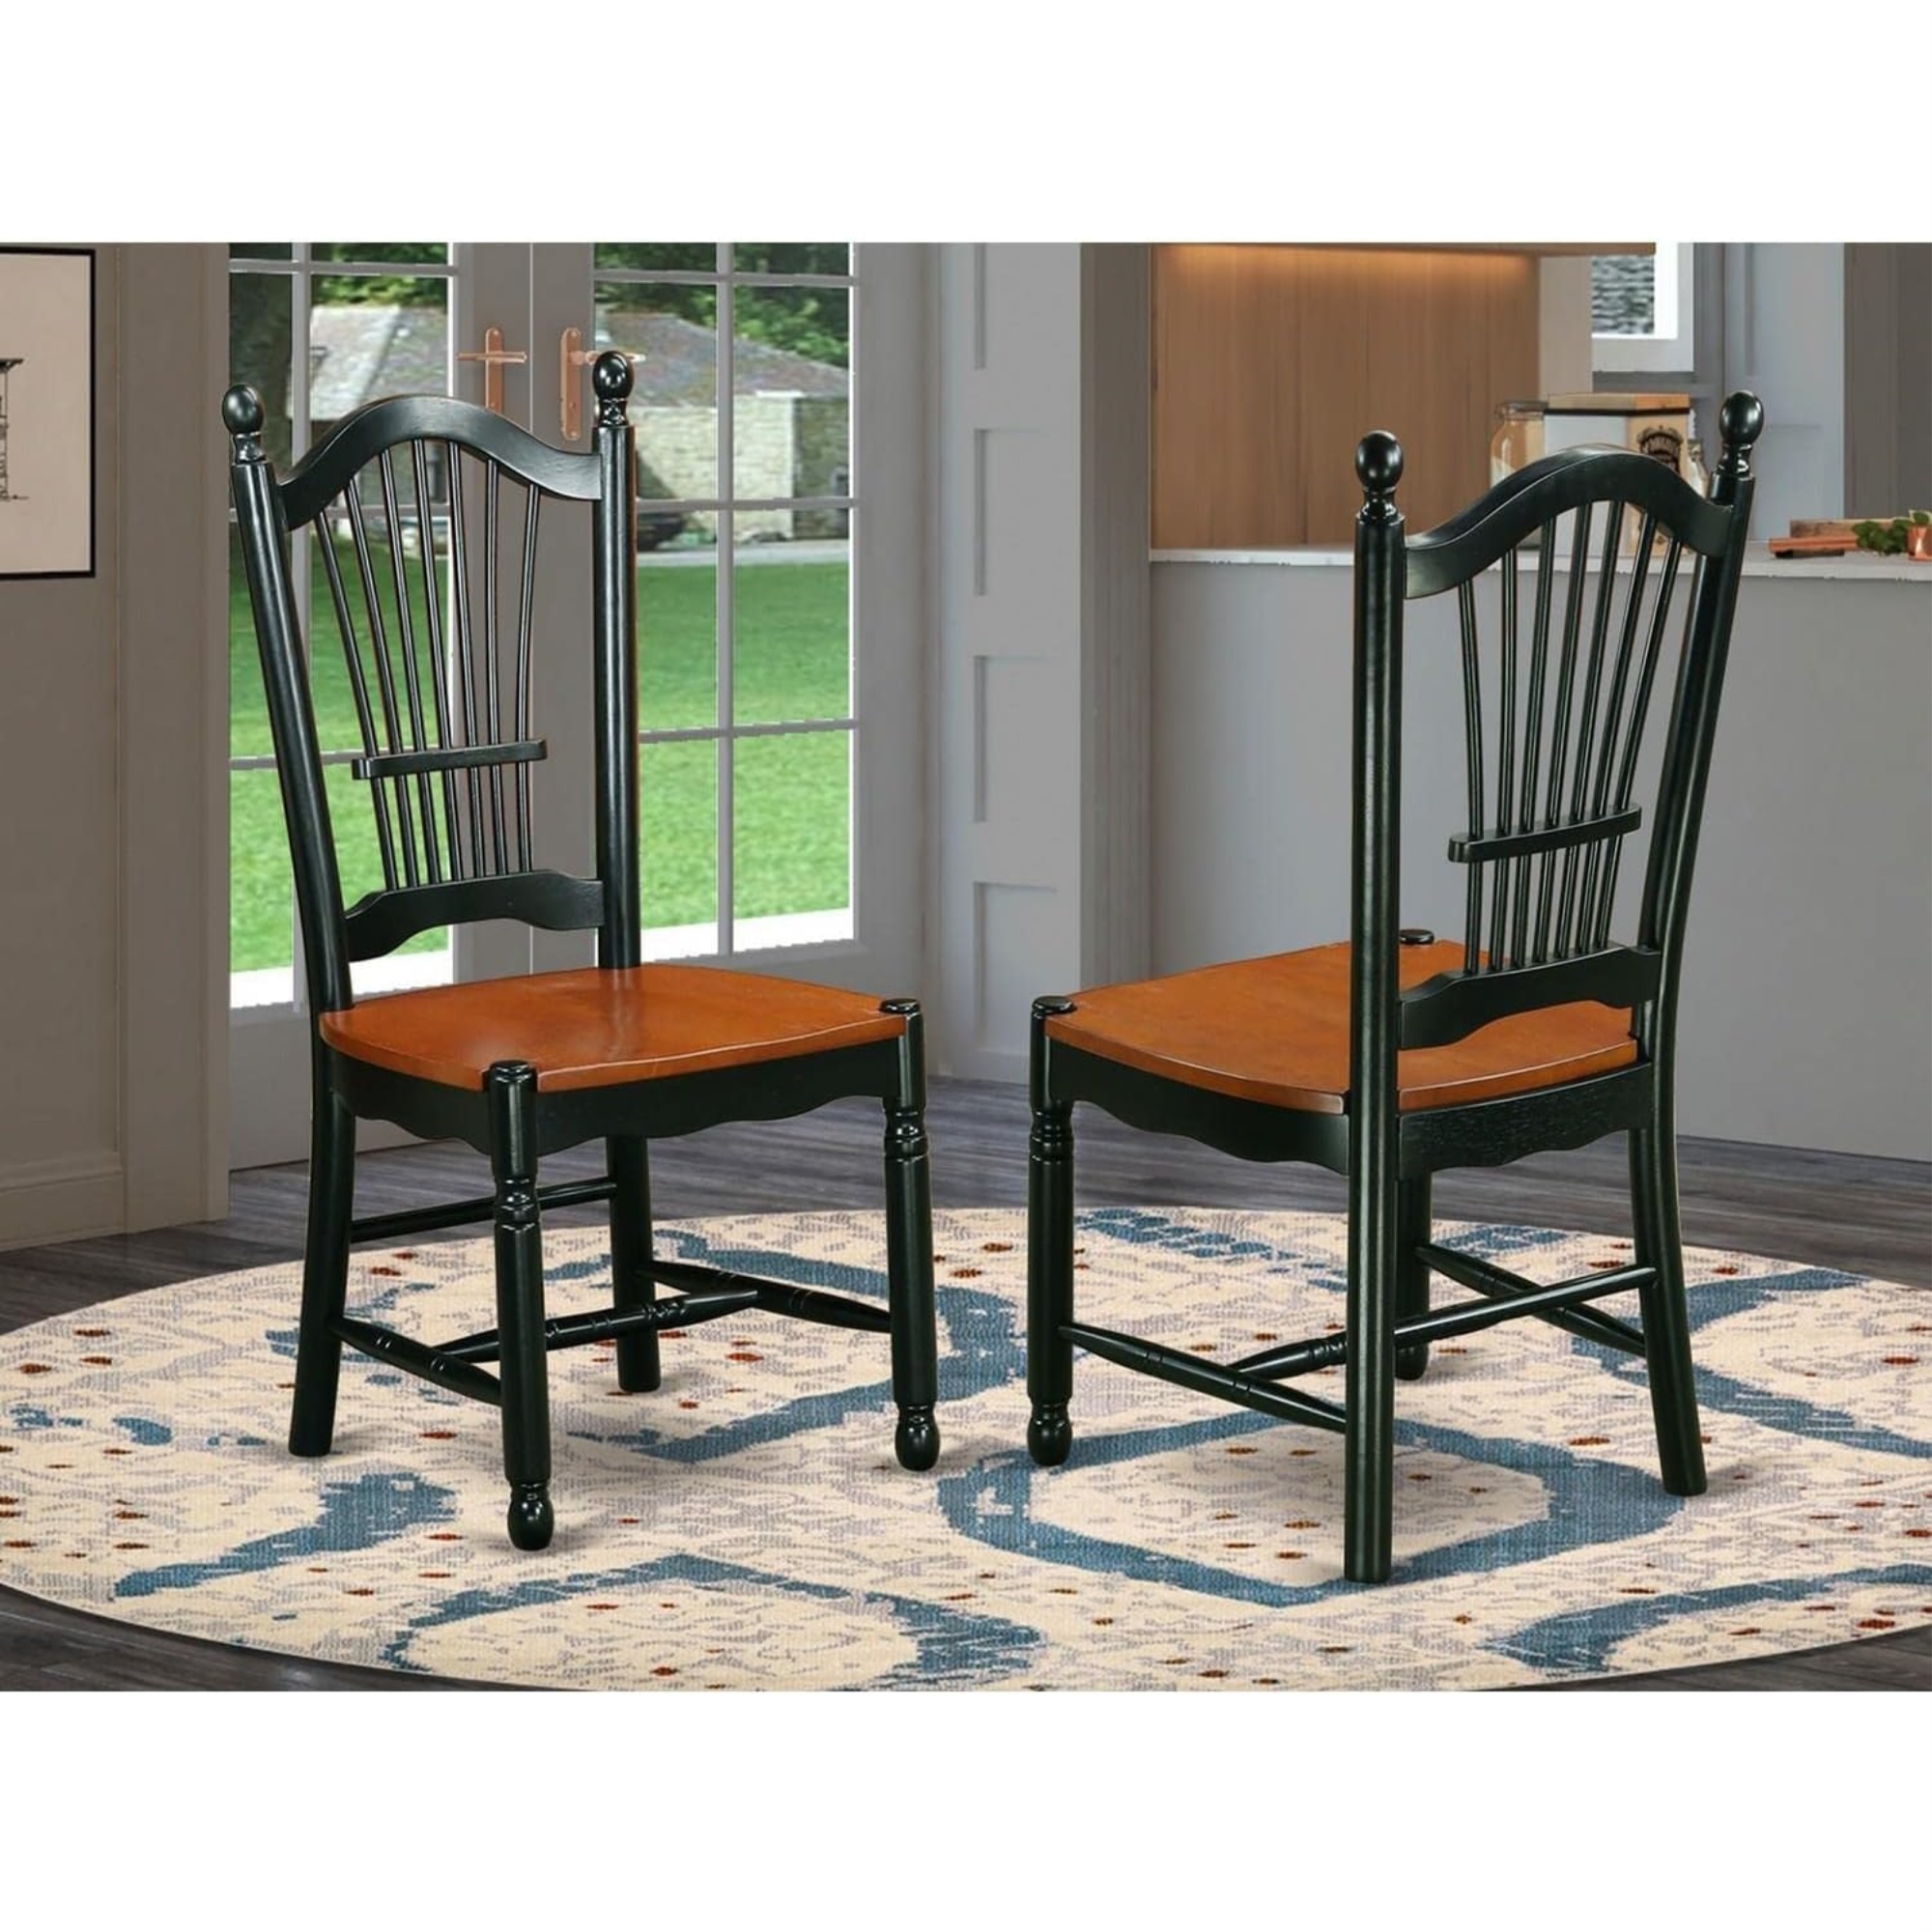 East West Furniture Set of 2 Chairs DOC-BCH-W Dover Dining Room Chairs With Wood Seat - Finished in Black and Cherry